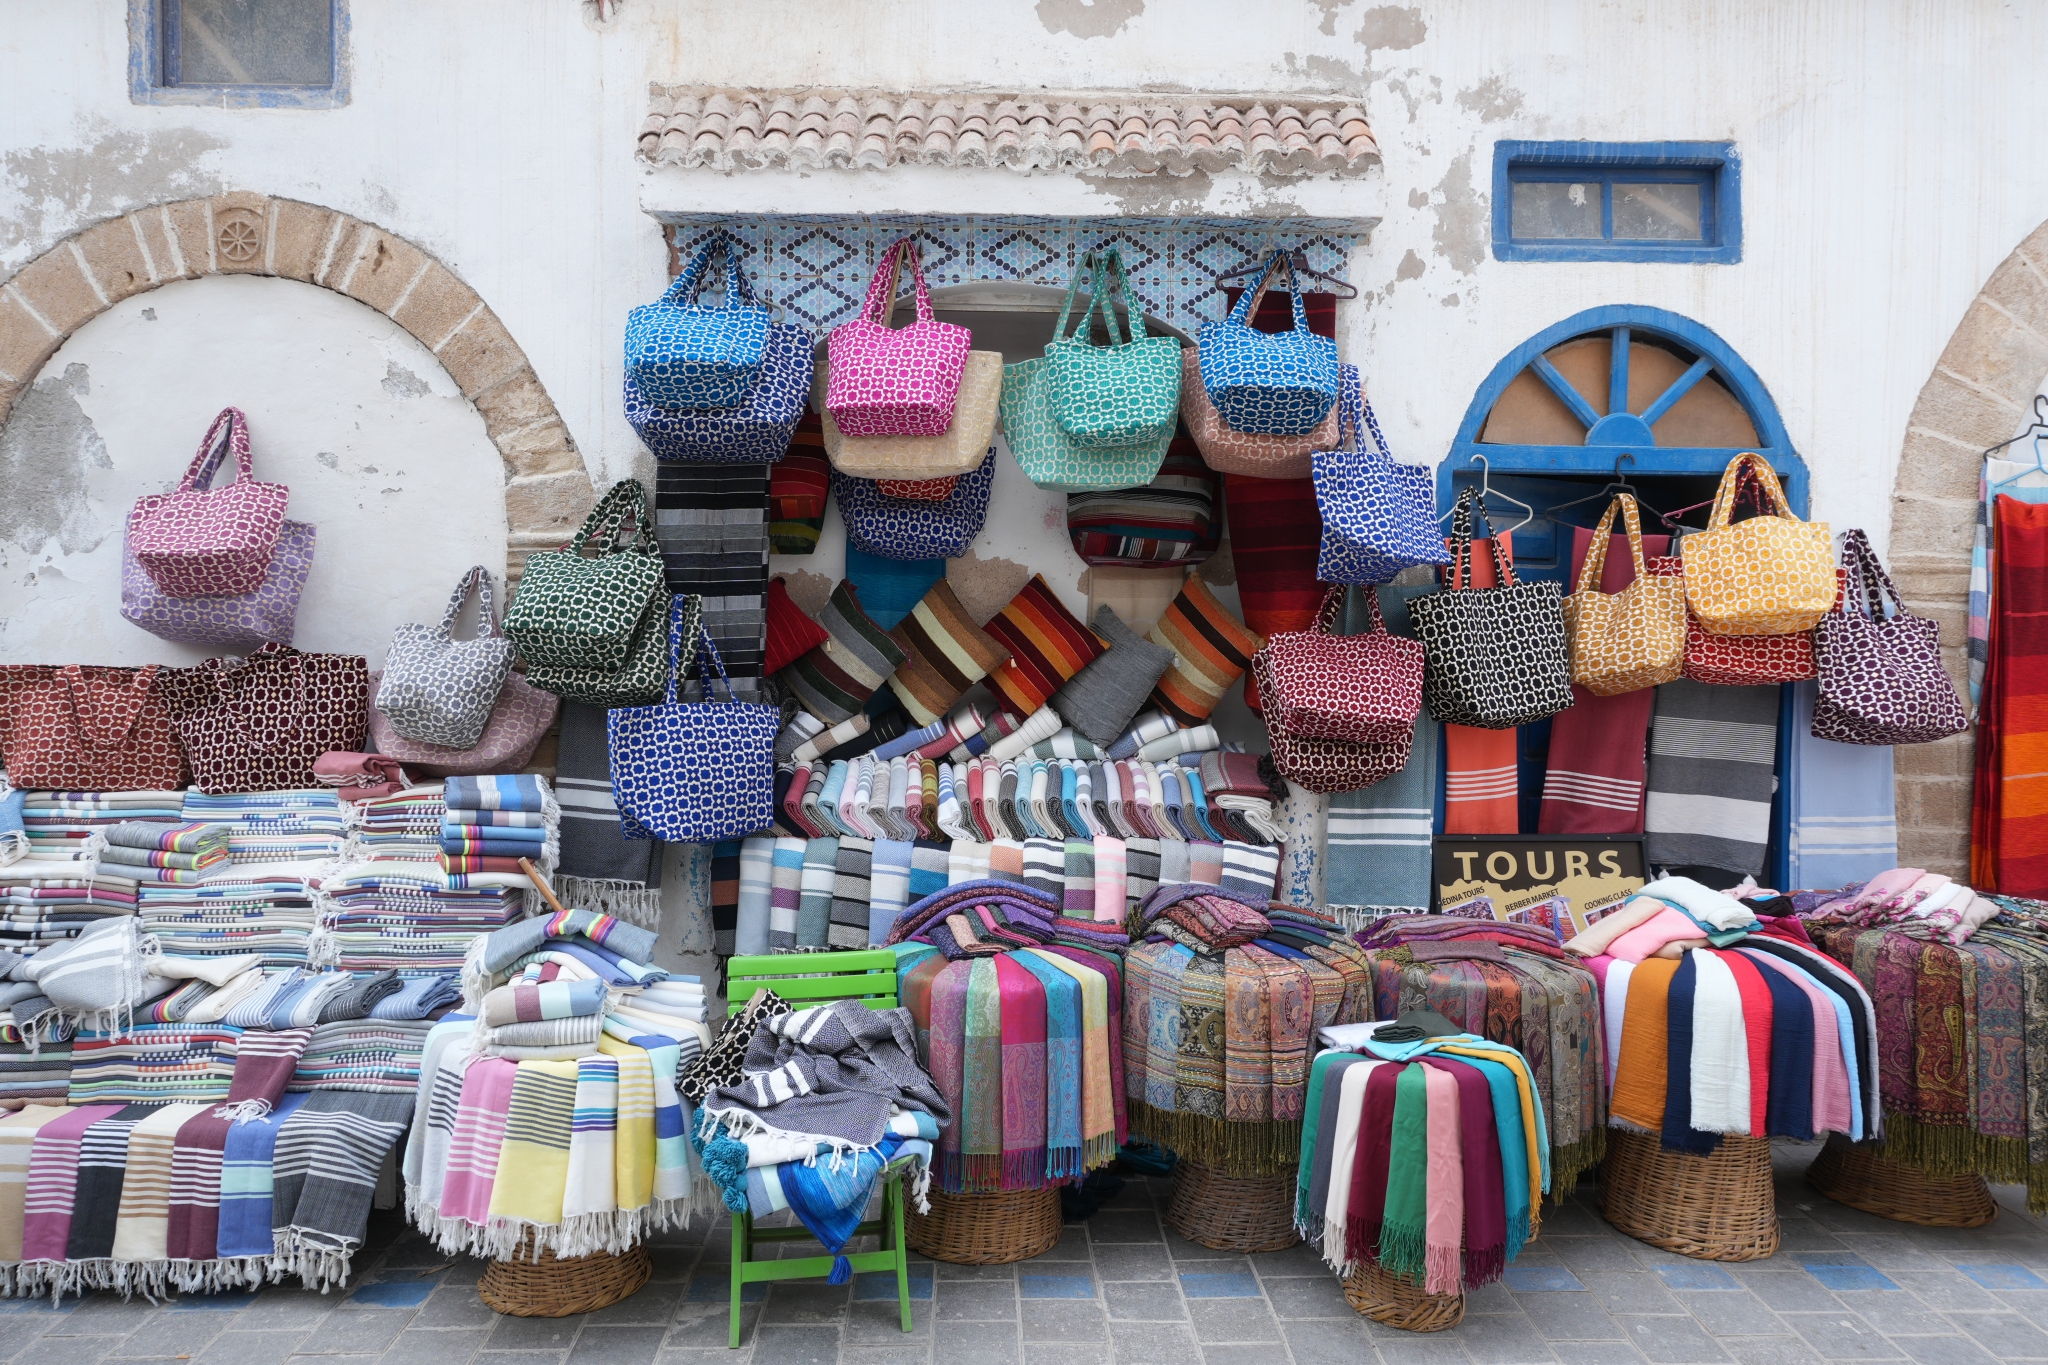 Sample image of a Moroccan market stall with a variety of colourful bags and fabrics on display, showing the resolution